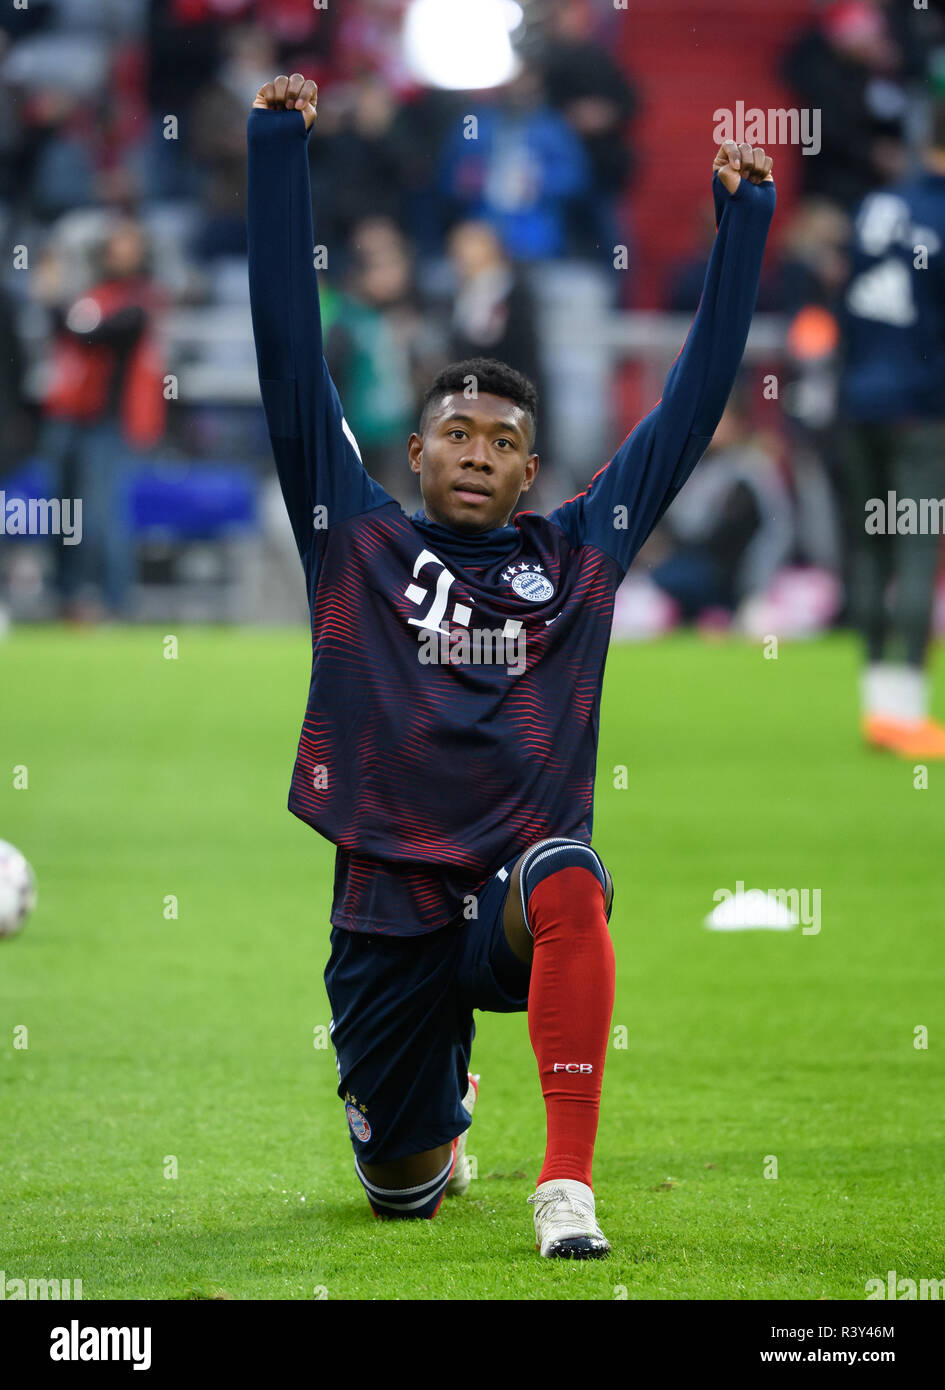 24 November 2018, Bavaria, München: Soccer: Bundesliga, Bayern Munich - Fortuna Düsseldorf, 12th matchday in the Allianz Arena. David Alaba of Munich warms up. Photo: Sven Hoppe/dpa - IMPORTANT NOTE: In accordance with the requirements of the DFL Deutsche Fußball Liga or the DFB Deutscher Fußball-Bund, it is prohibited to use or have used photographs taken in the stadium and/or the match in the form of sequence images and/or video-like photo sequences. Stock Photo